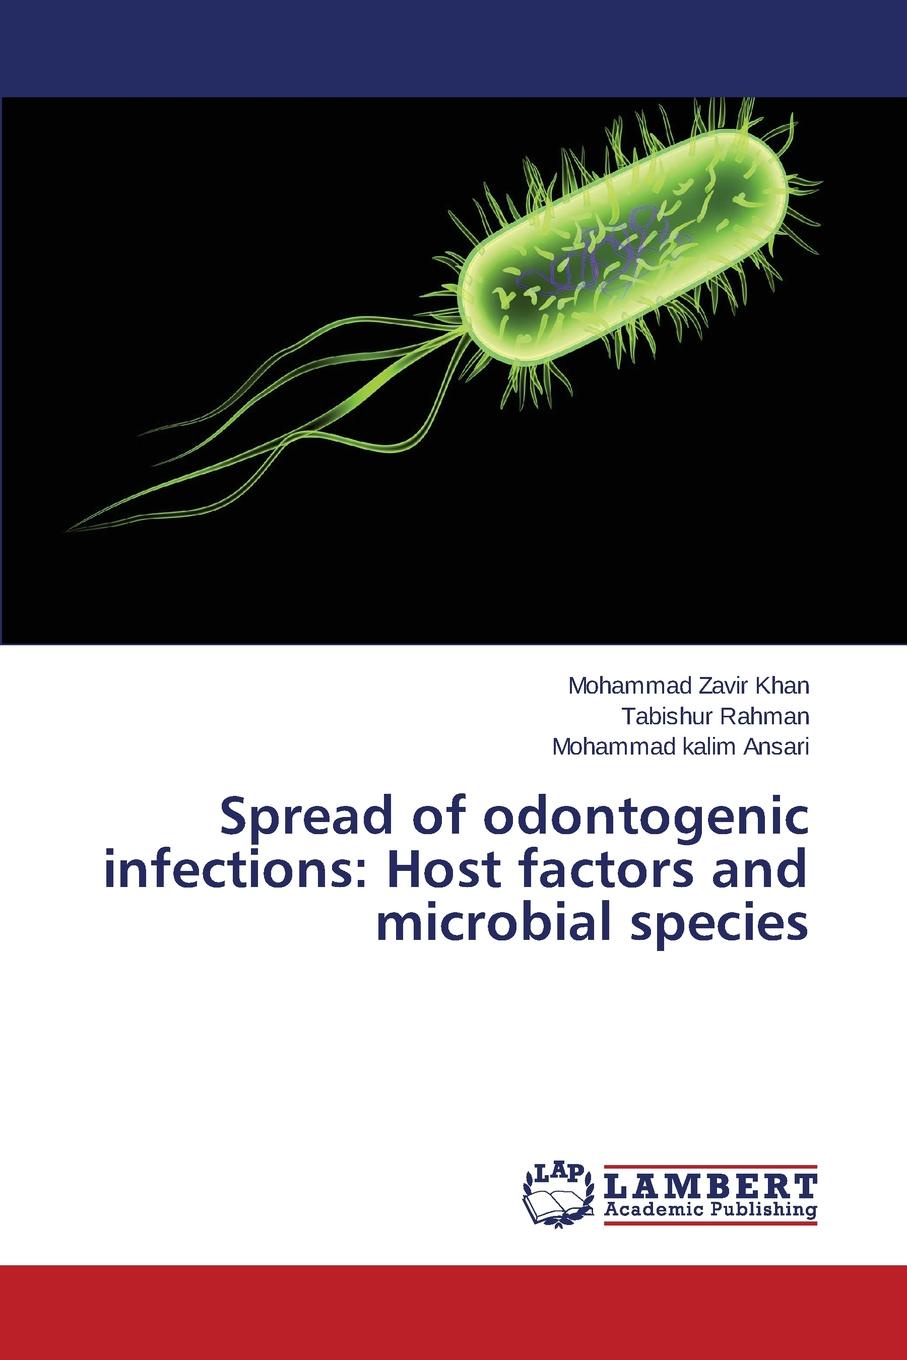 Spread of odontogenic infections. Host factors and microbial species